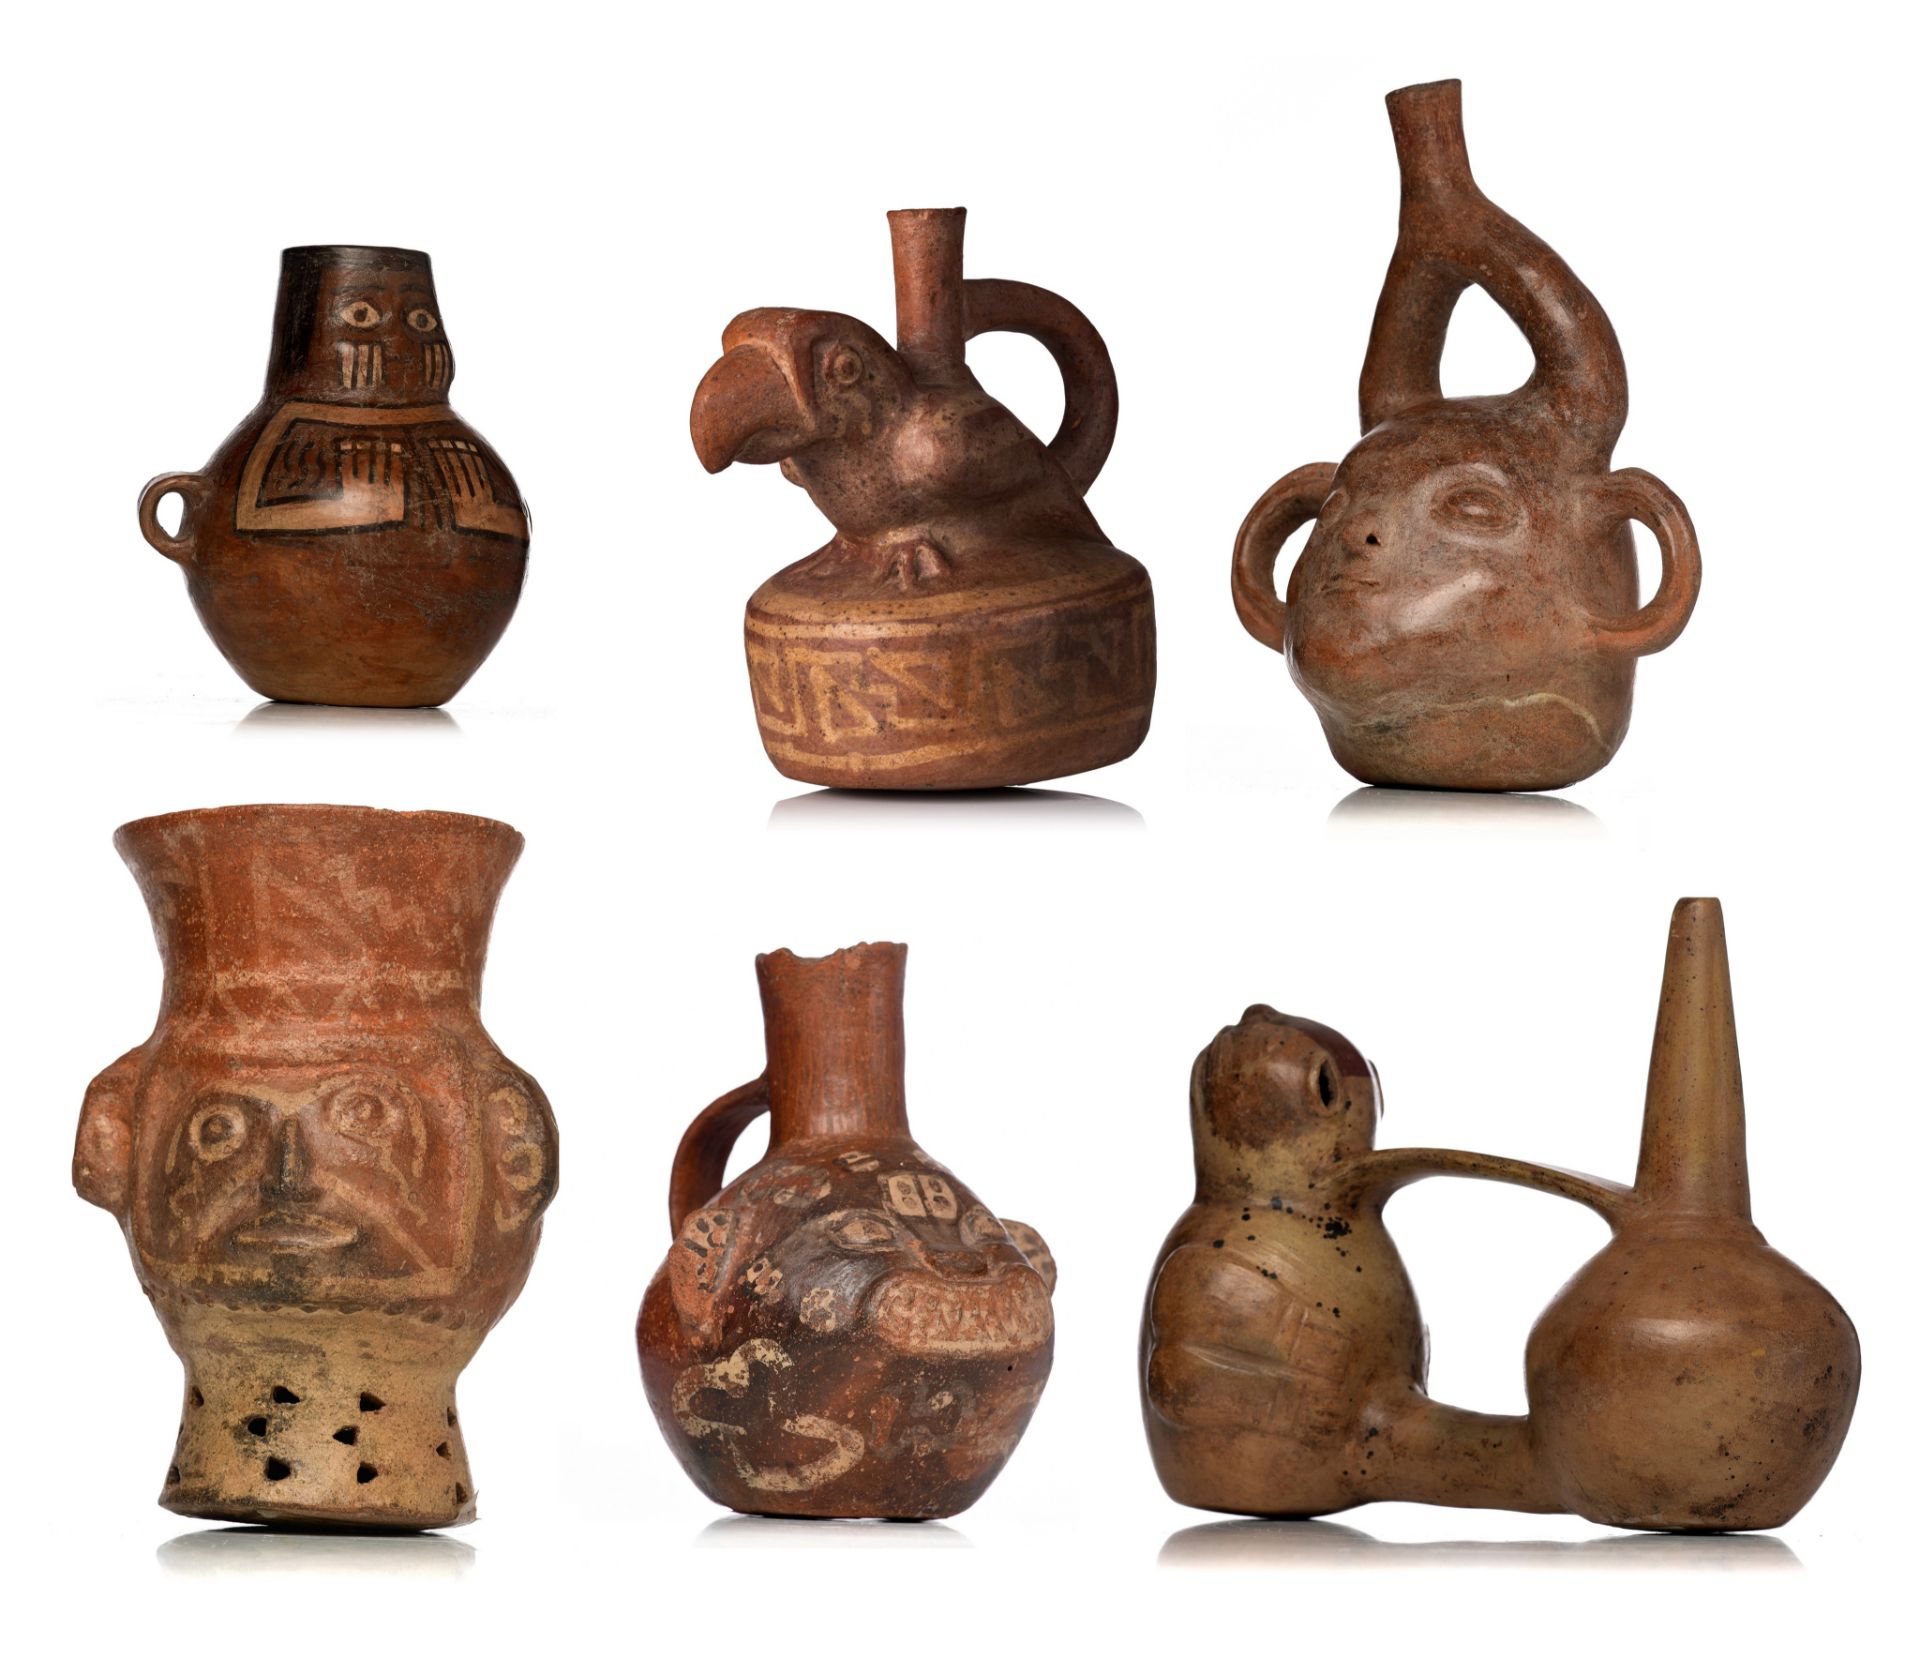 A collection of six Pre-Columbian type objects, Peru, H 16 - 20,5 cm